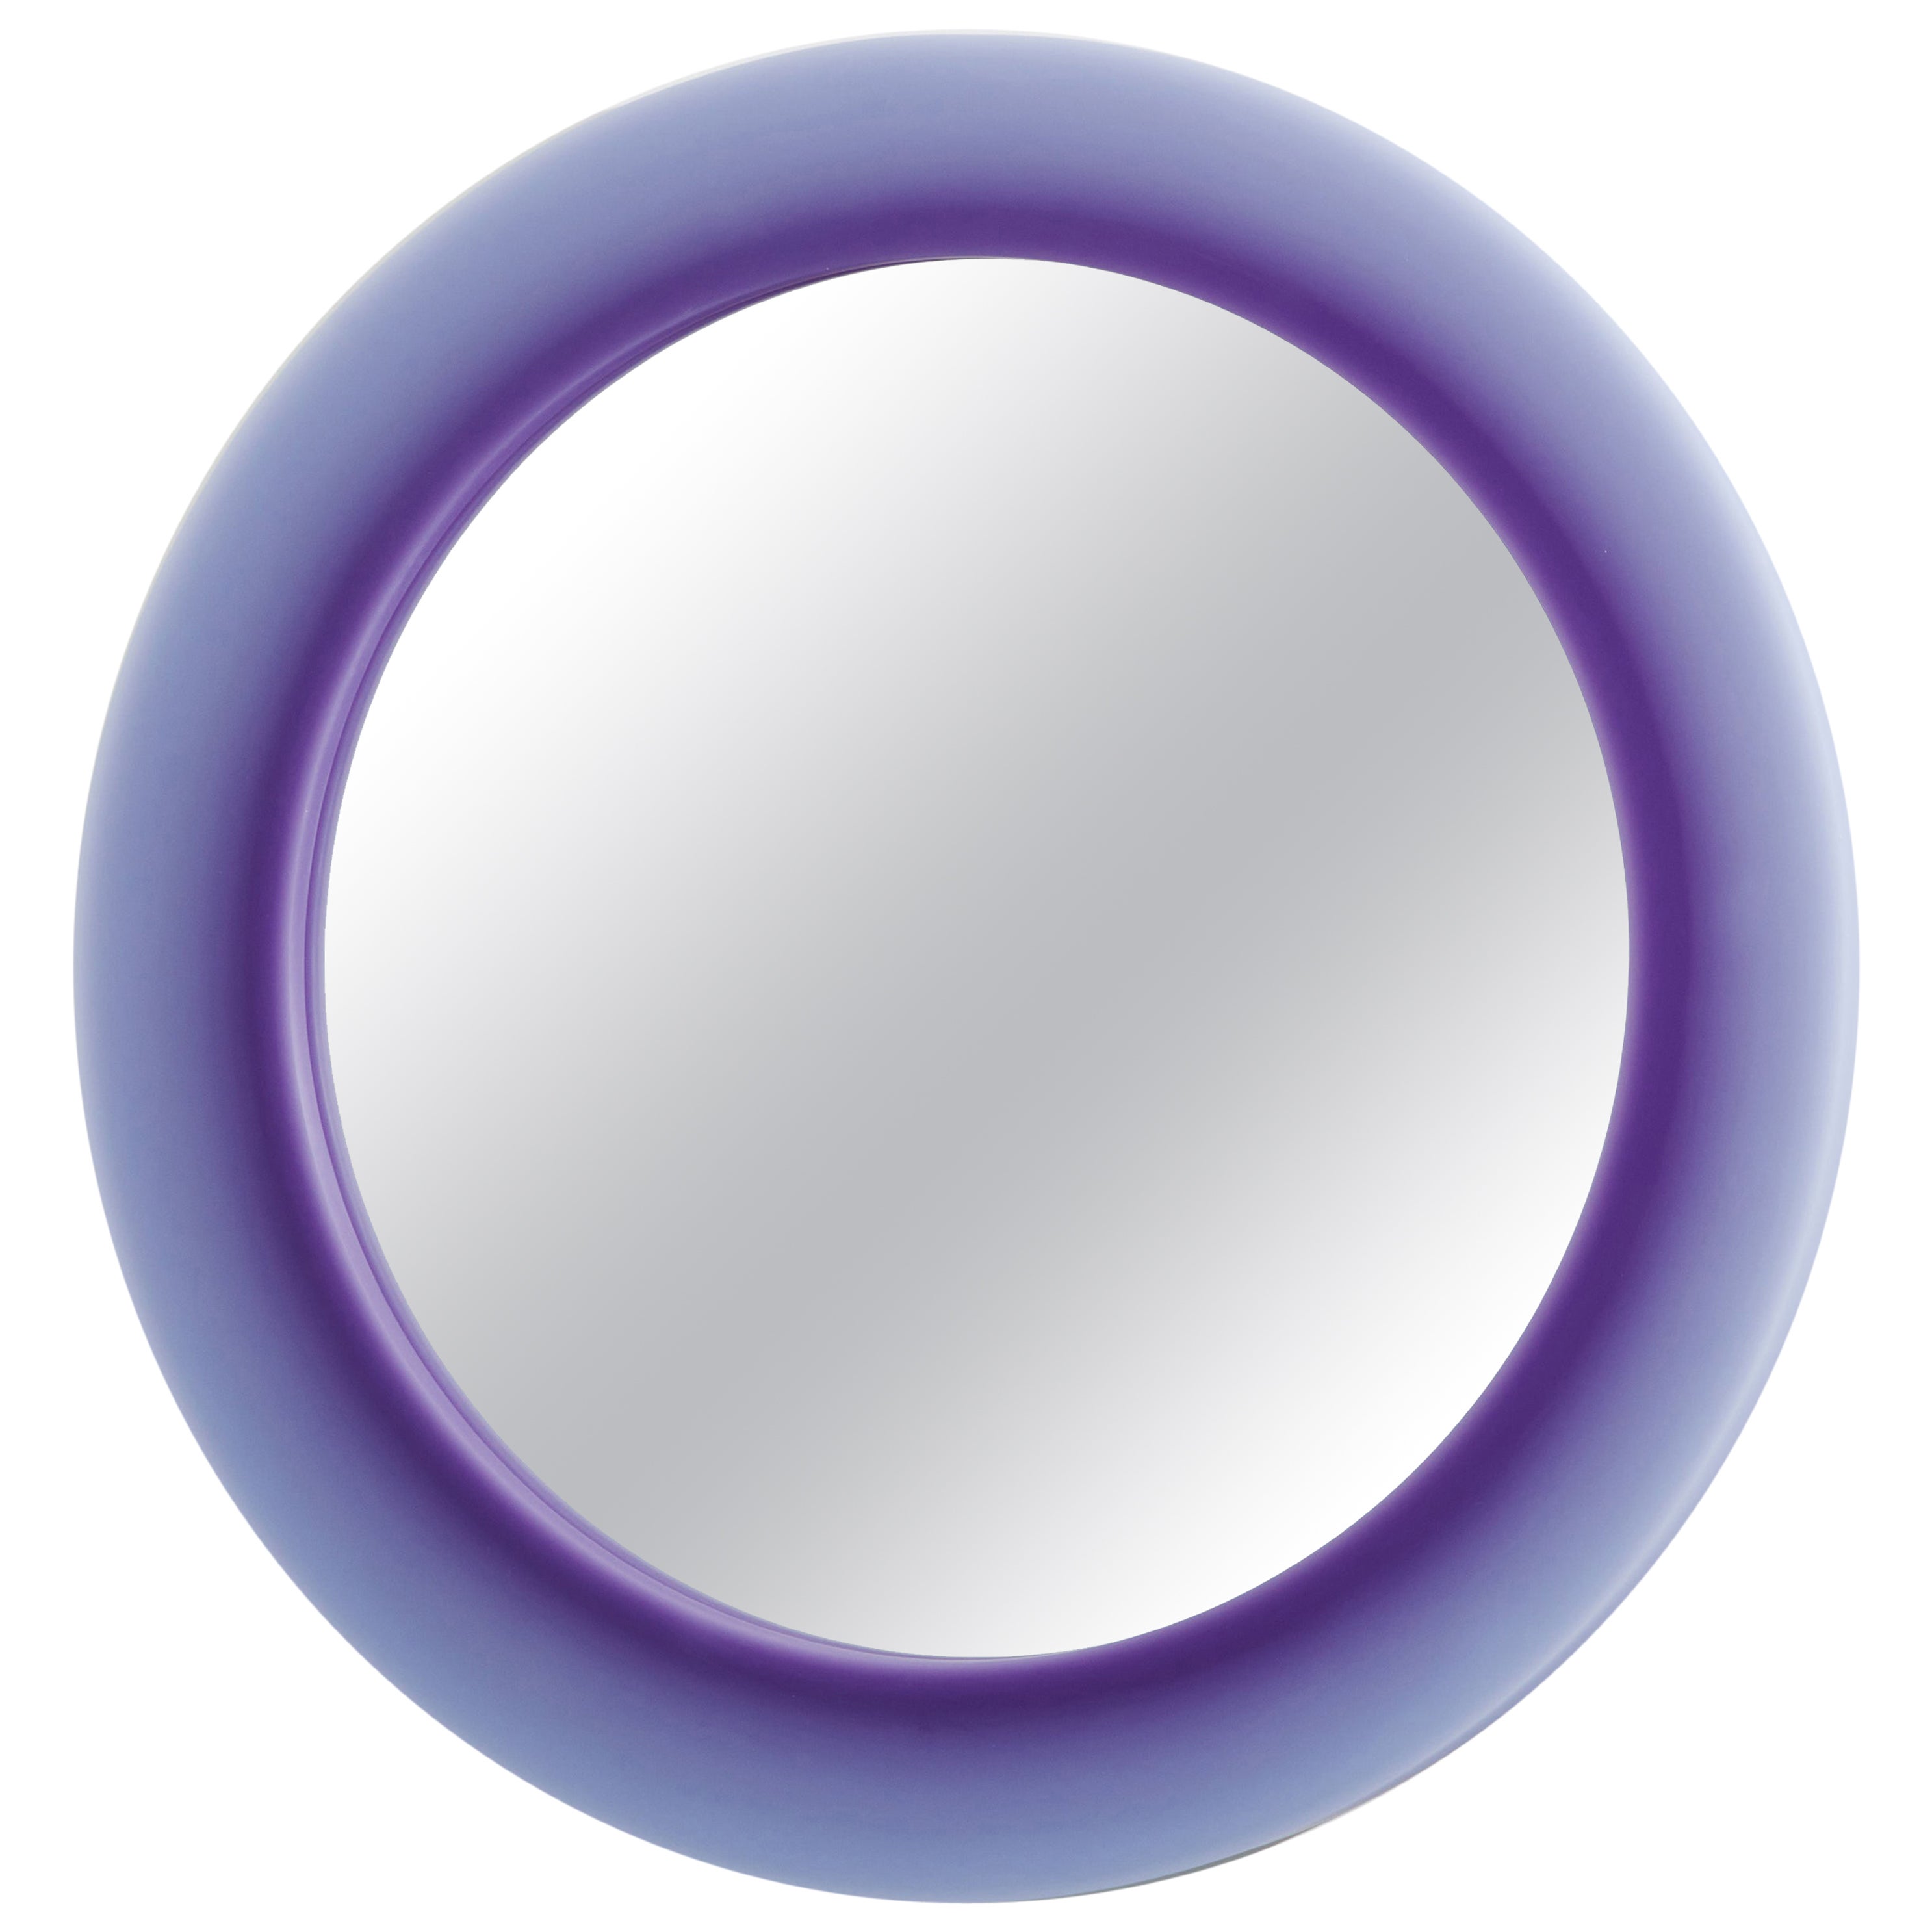 Purple Halo Resin Mirror by Facture Studio, Represented by Tuleste Factory For Sale